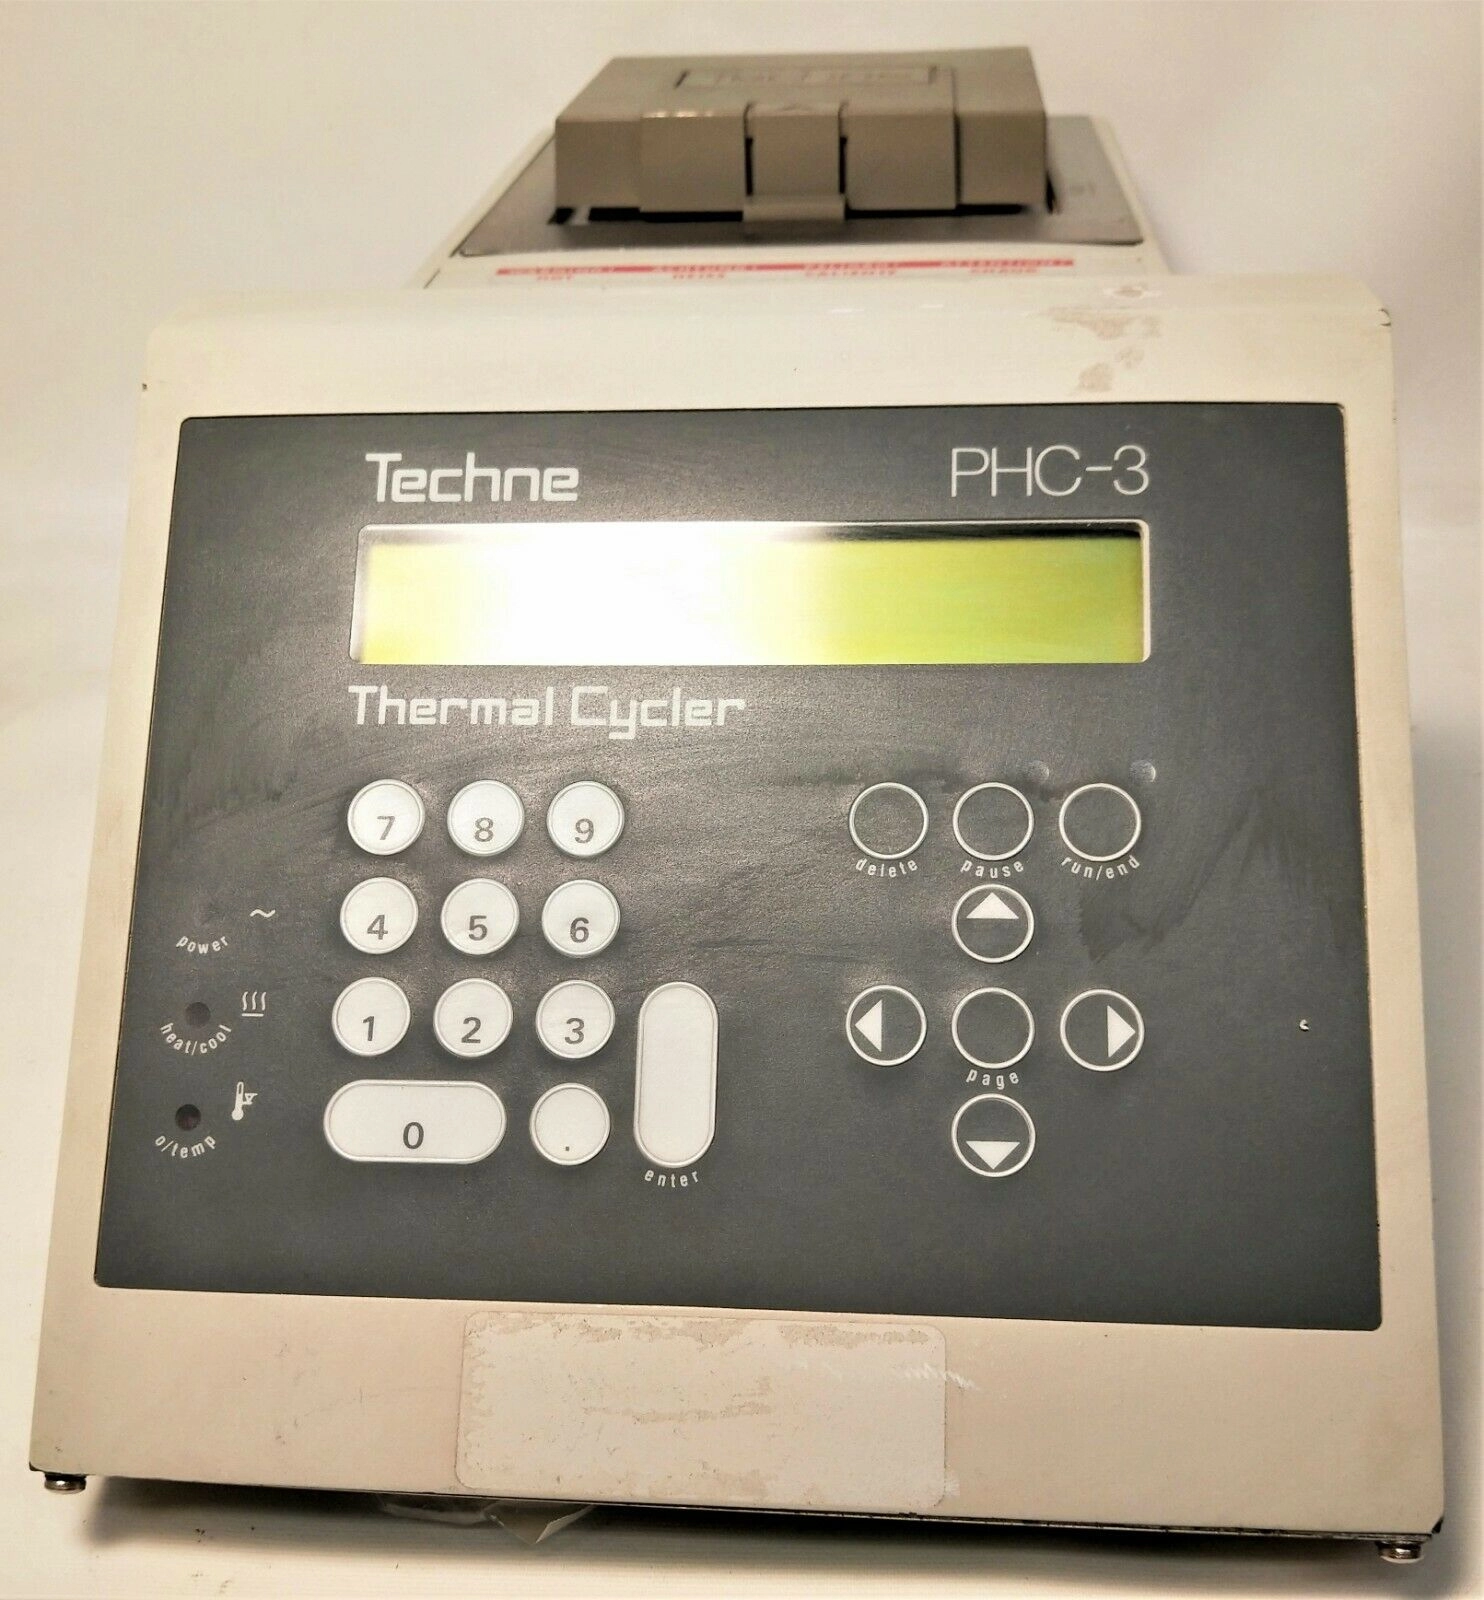 Techne PHC-3 Thermal Cycler